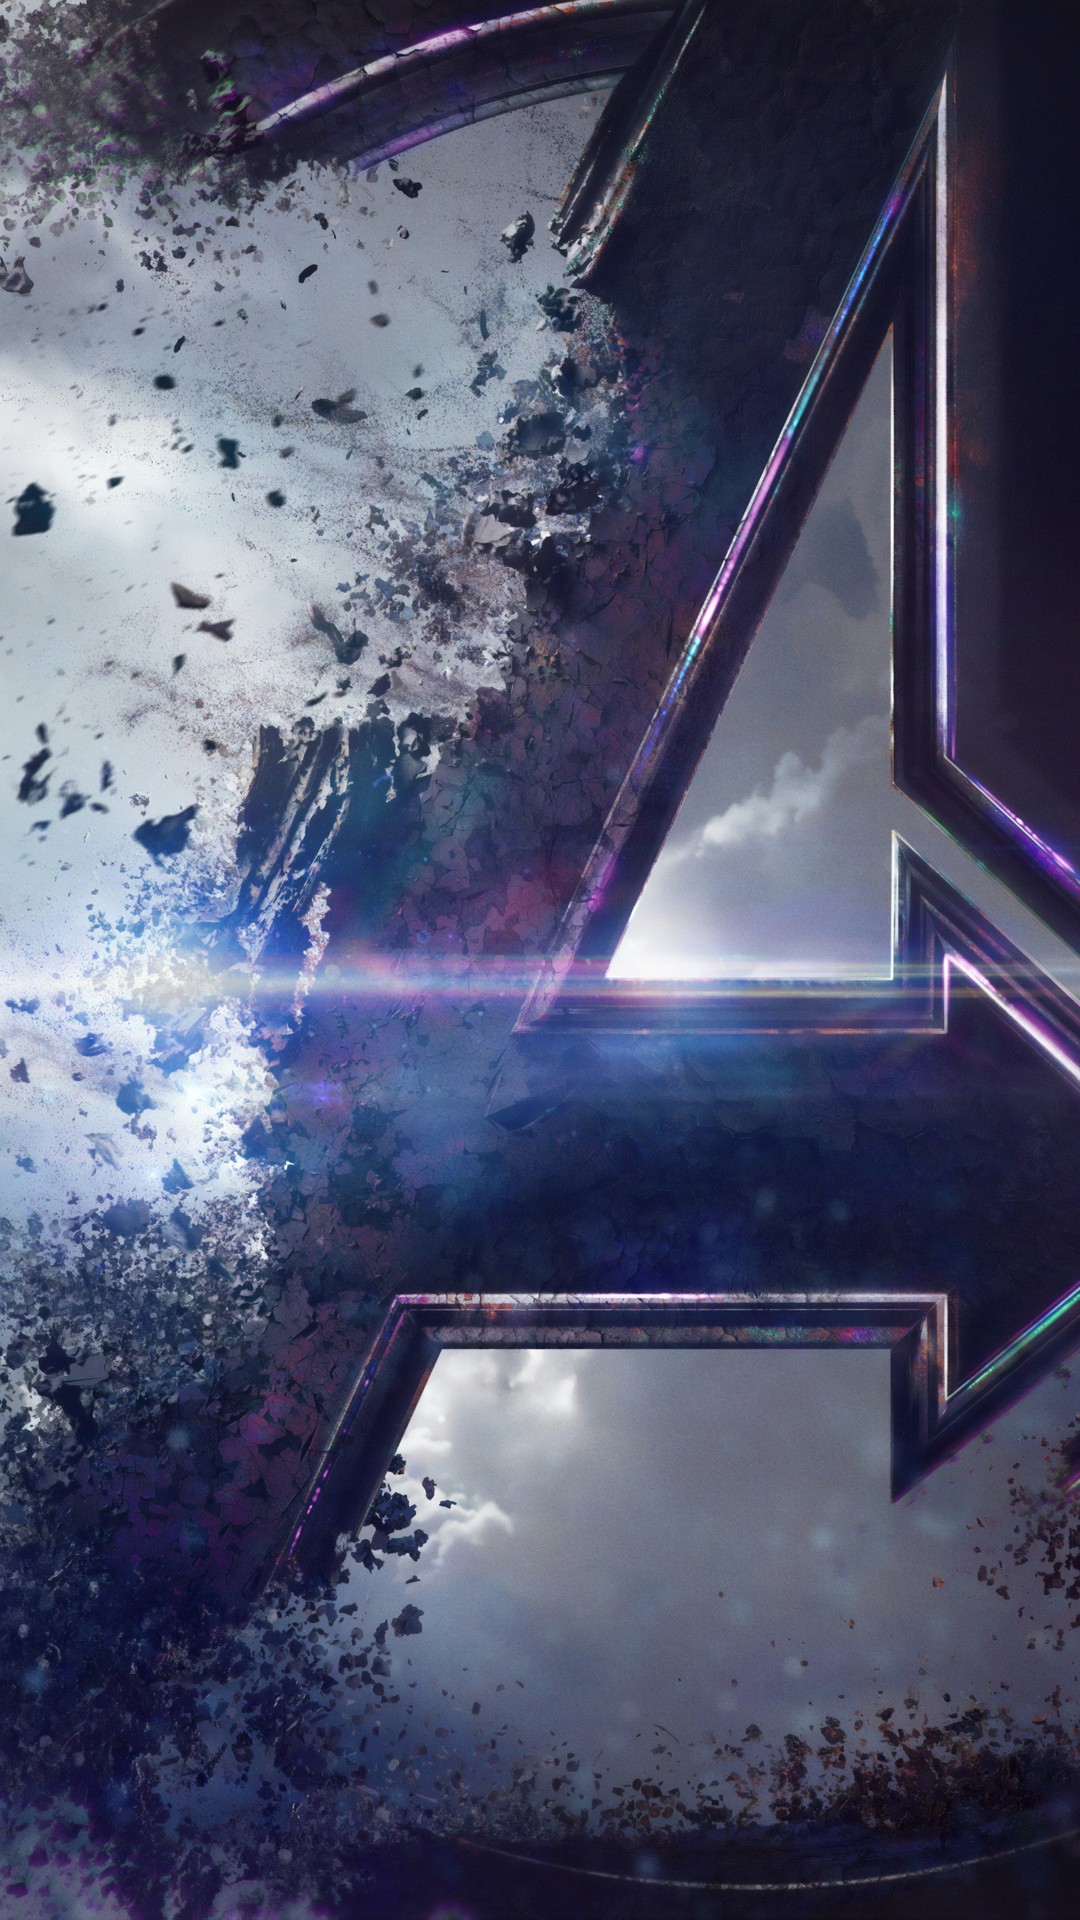 Avengers Endgame 2019 Wallpaper For Mobile with high-resolution 1080x1920 pixel. You can use this poster wallpaper for your Desktop Computers, Mac Screensavers, Windows Backgrounds, iPhone Wallpapers, Tablet or Android Lock screen and another Mobile device